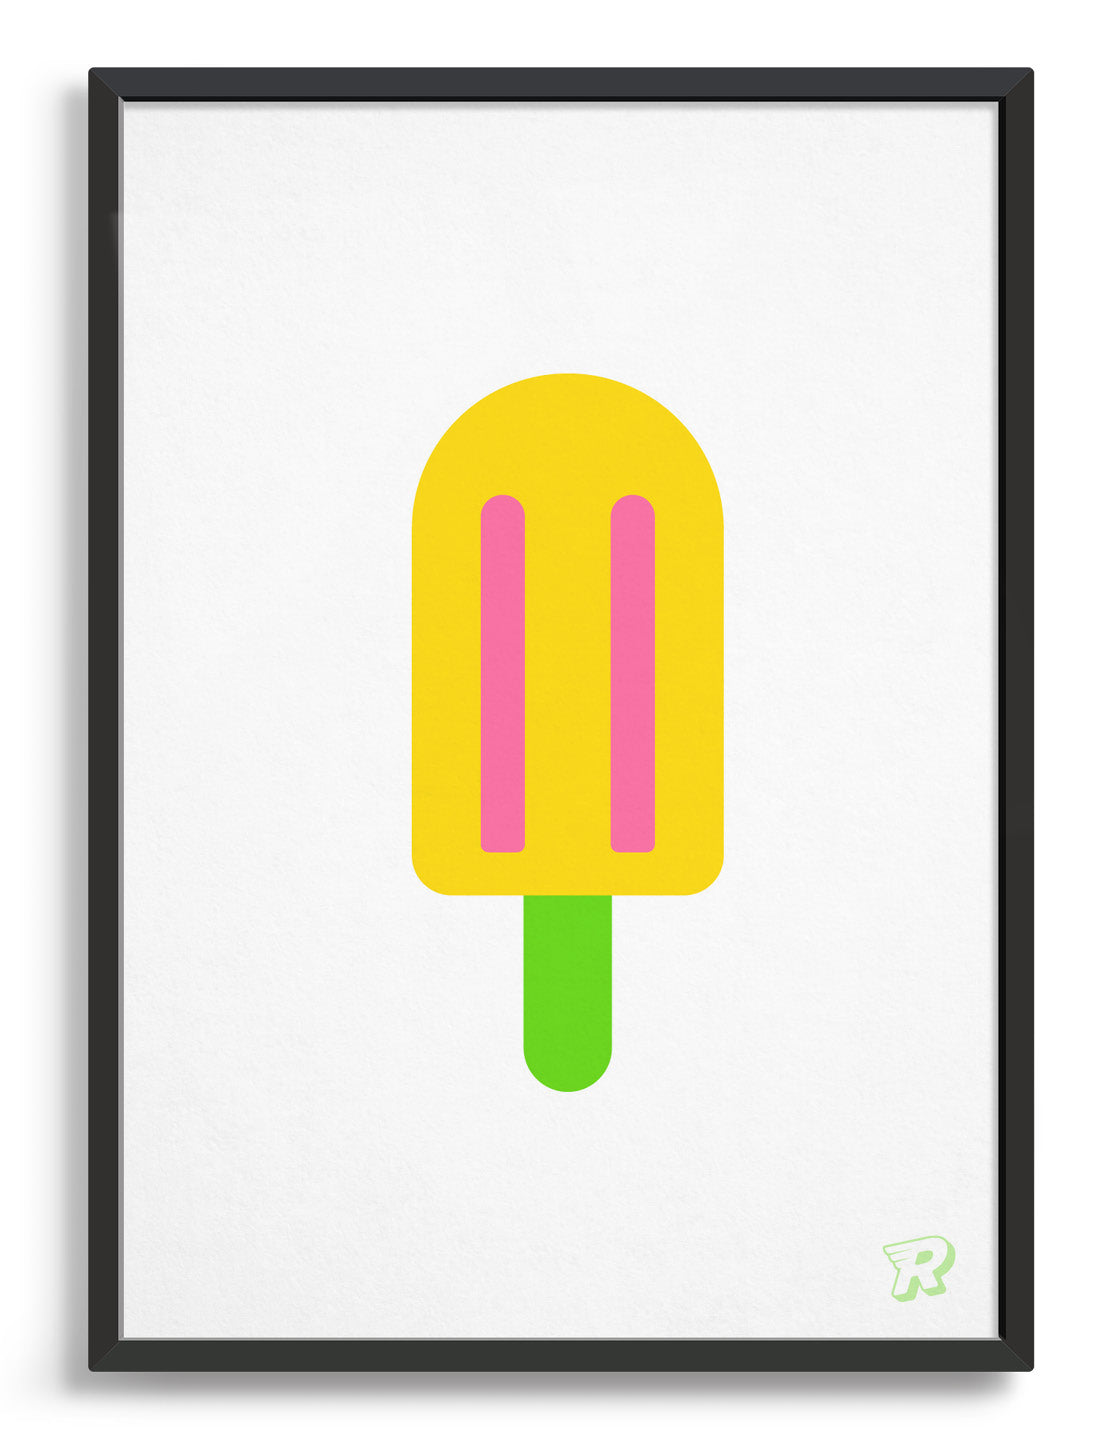 popsicle ice lolly art print with yellow lolly on a green stick against a white background